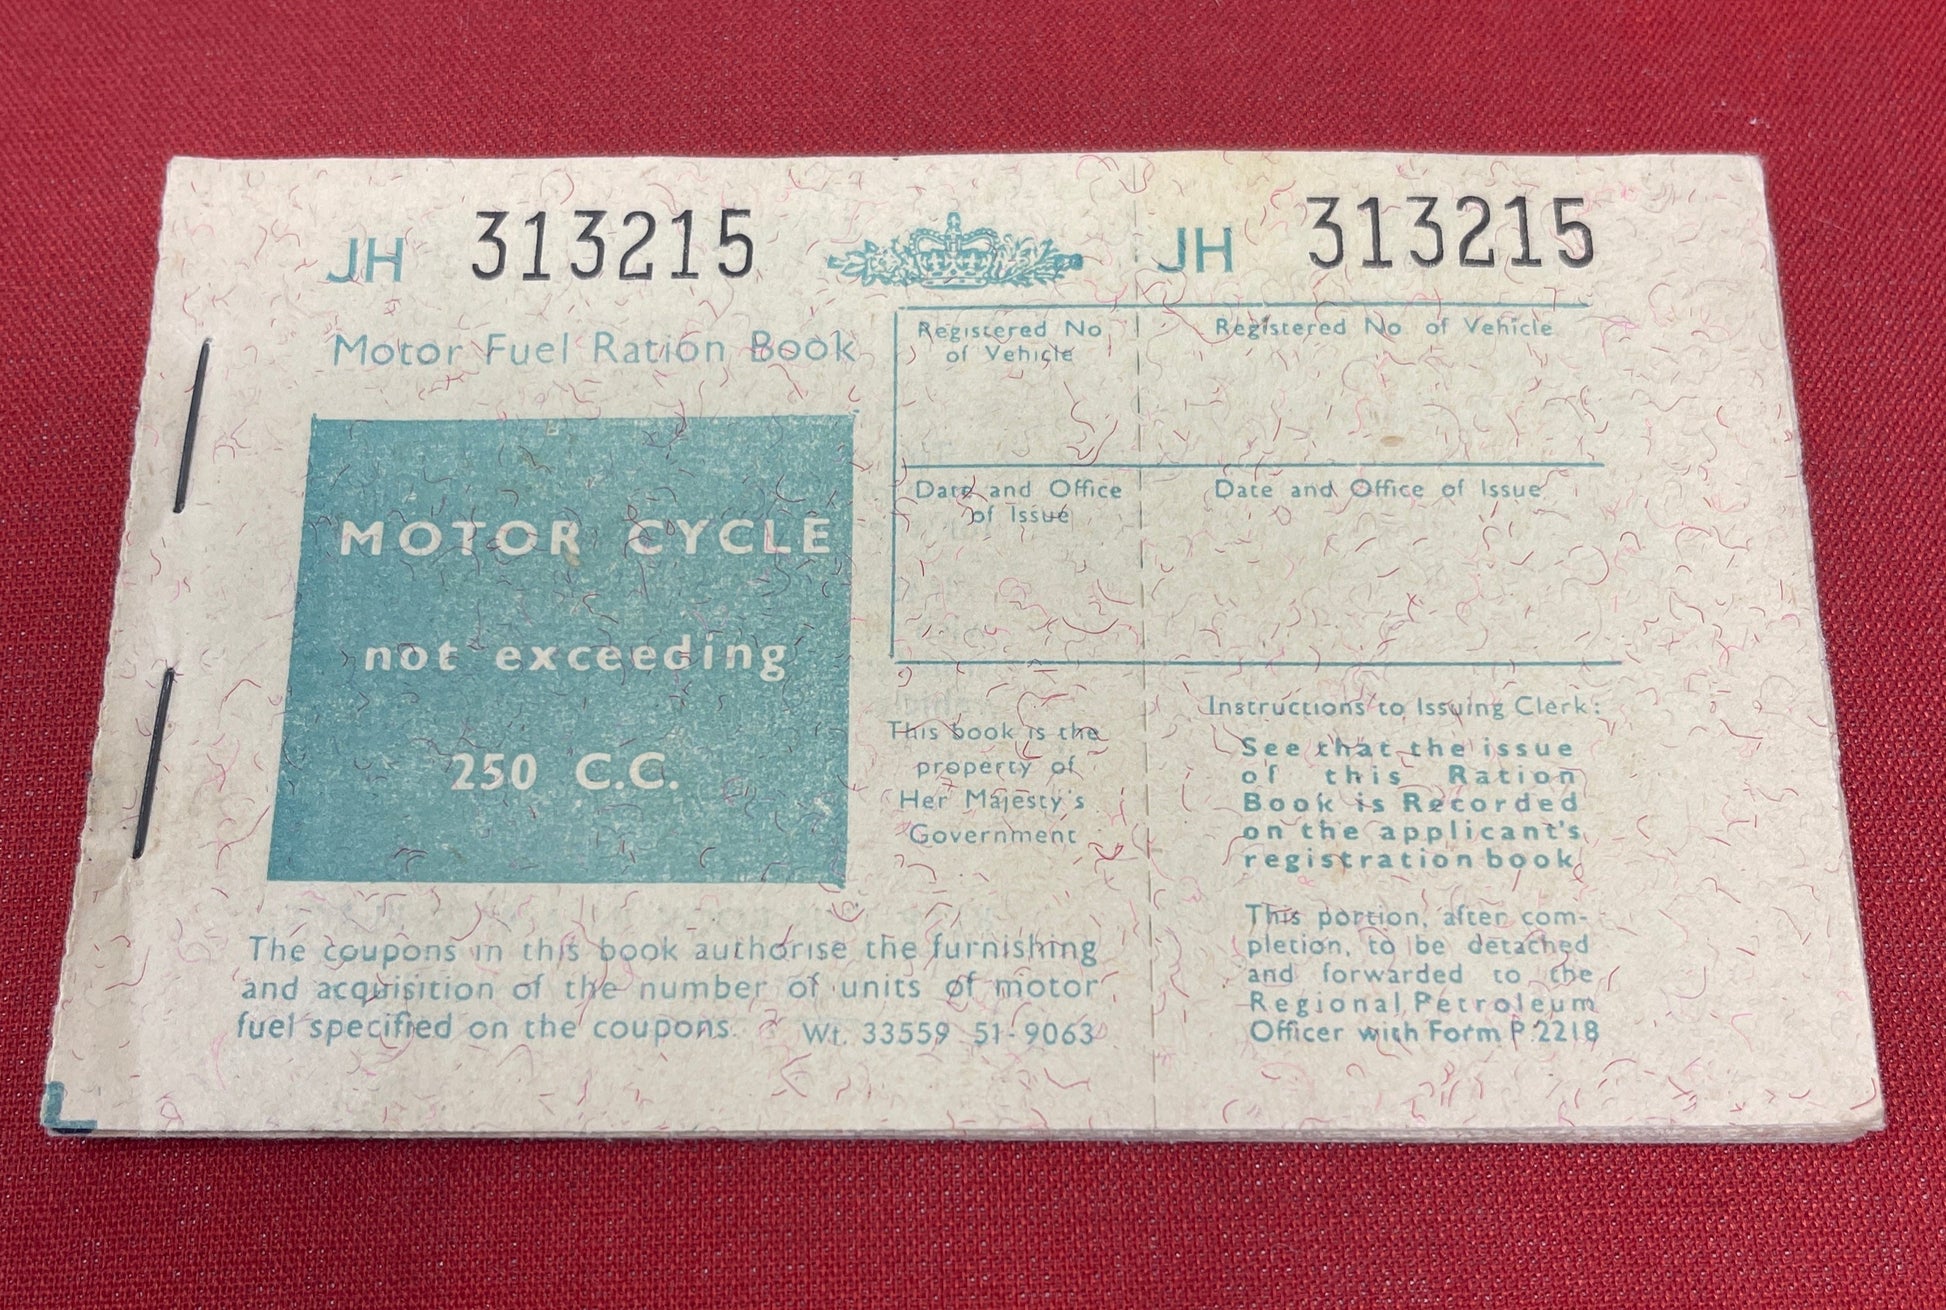  Motor Fuel Ration Book for Motor Cycle not exceeding 250CC 